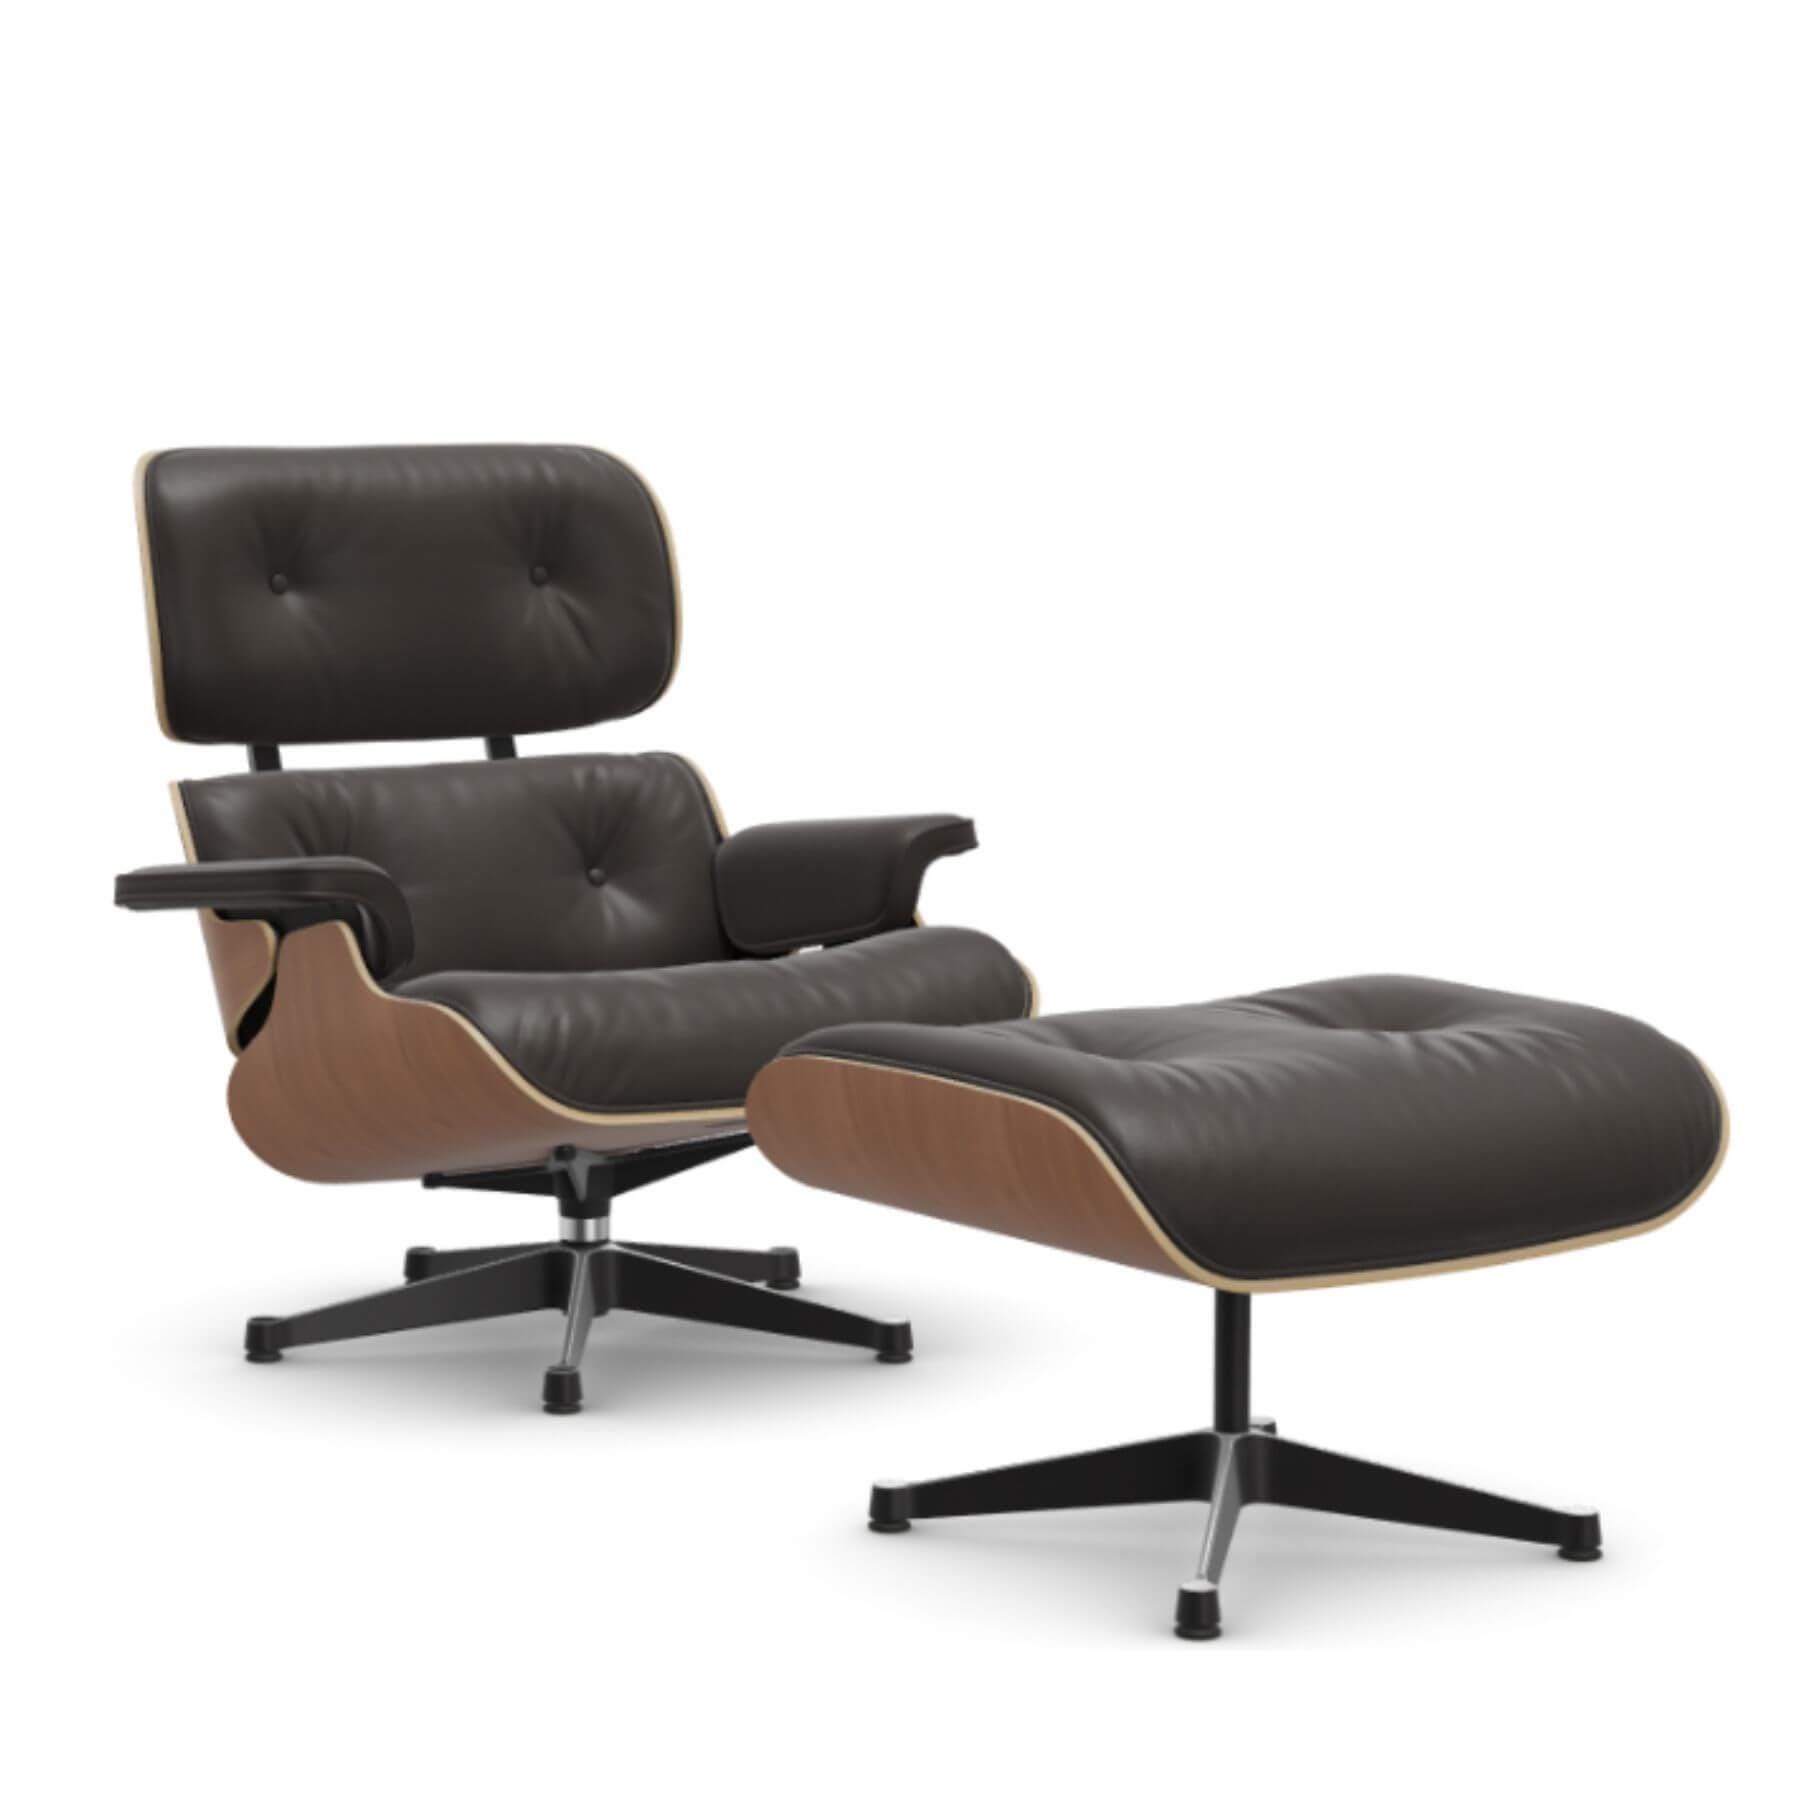 Vitra Eames Lounge Chair American Cherry Leather Natural F Chocolate Polished Black With Ottoman Light Wood Designer Furniture From Holloways Of L